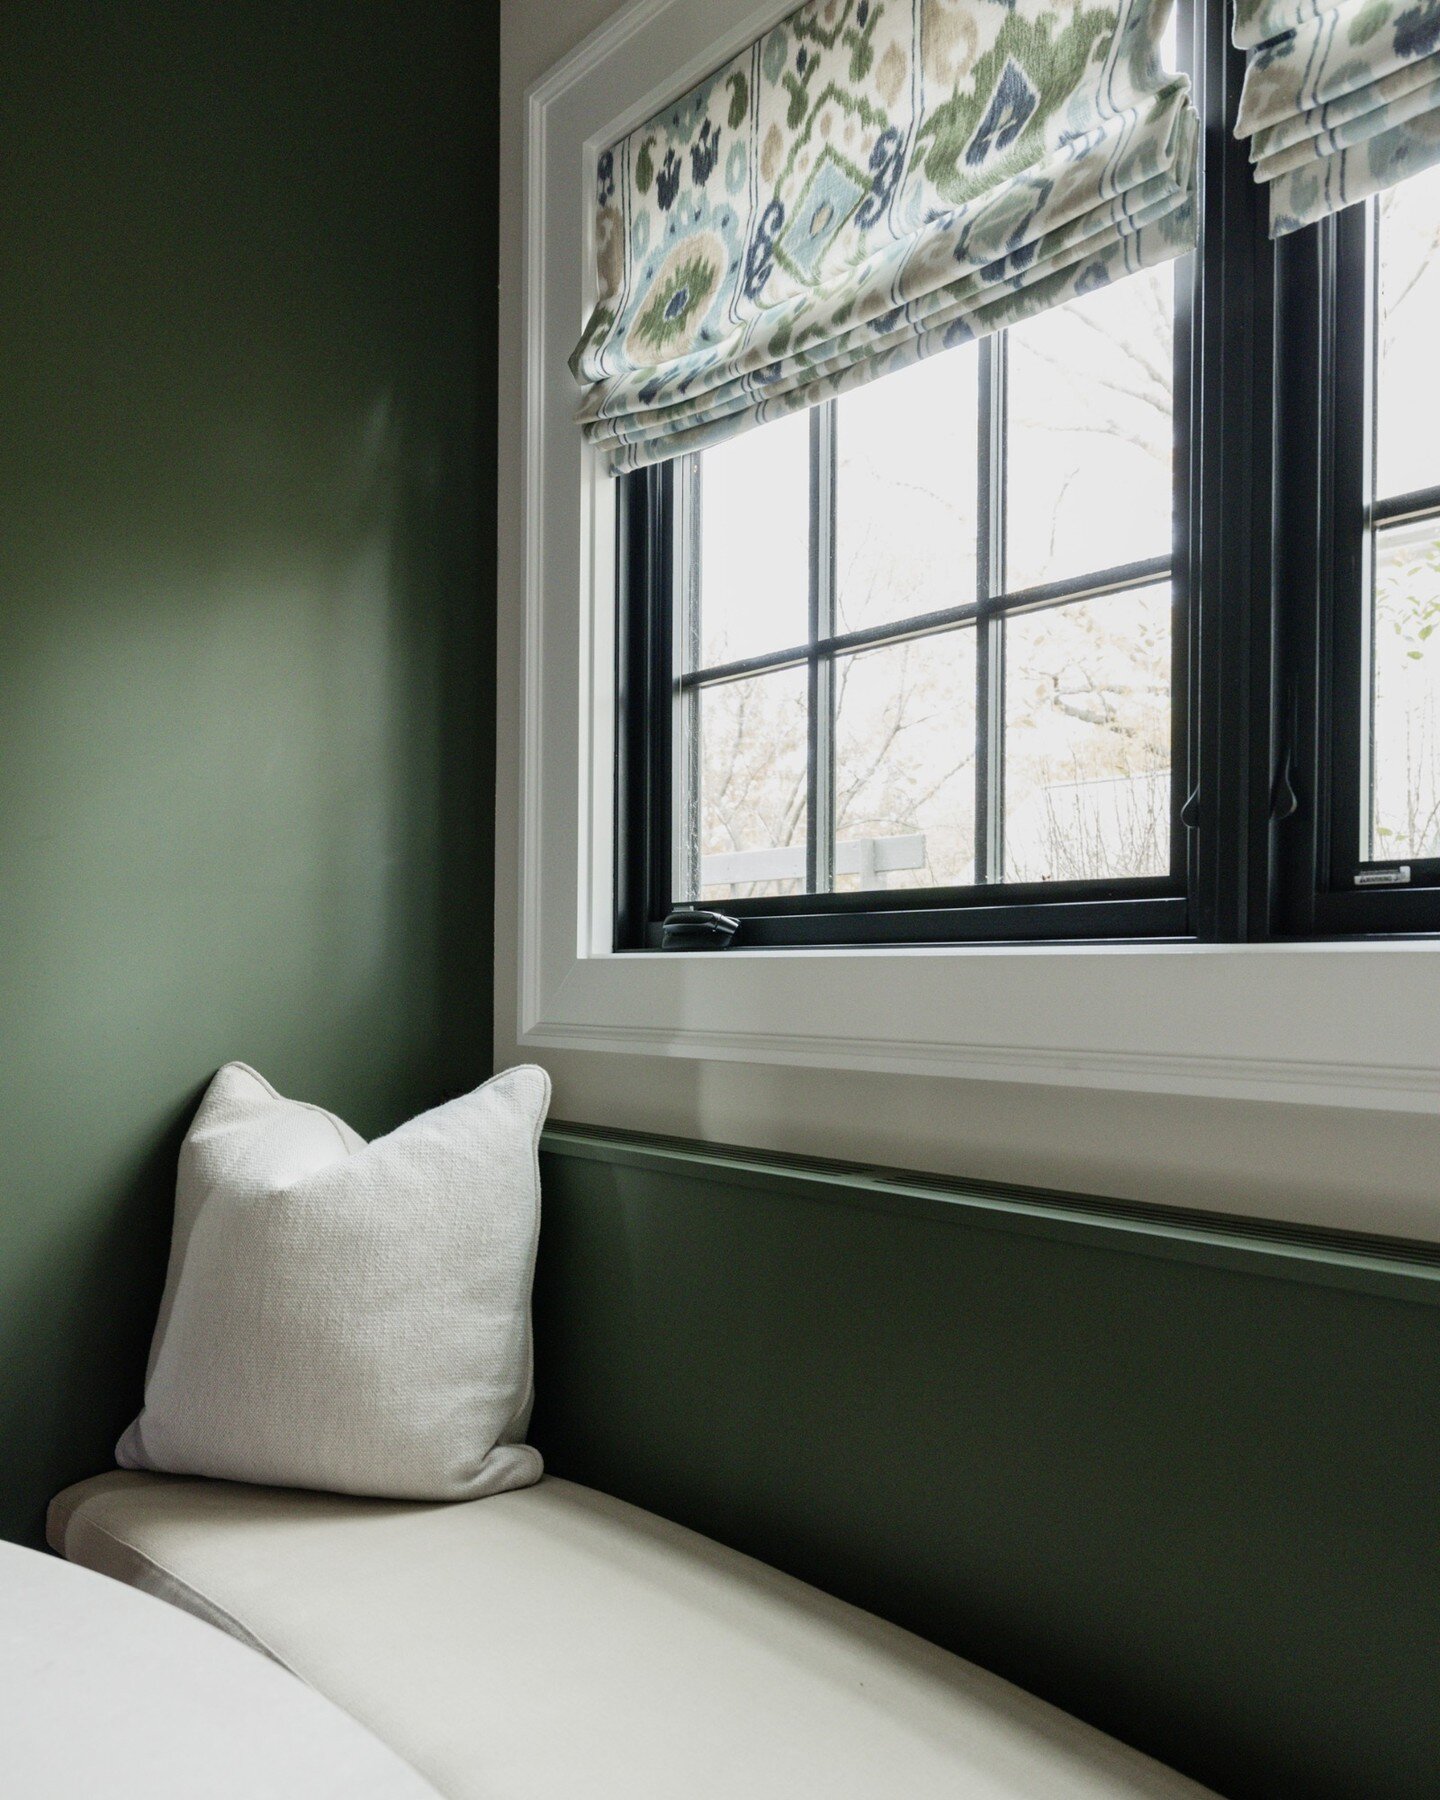 Seeing green at the W. St. James residence&mdash;more on this vibrant project coming soon.⁠ Wishing everyone a Happy St. Patrick's Day this weekend.⁠